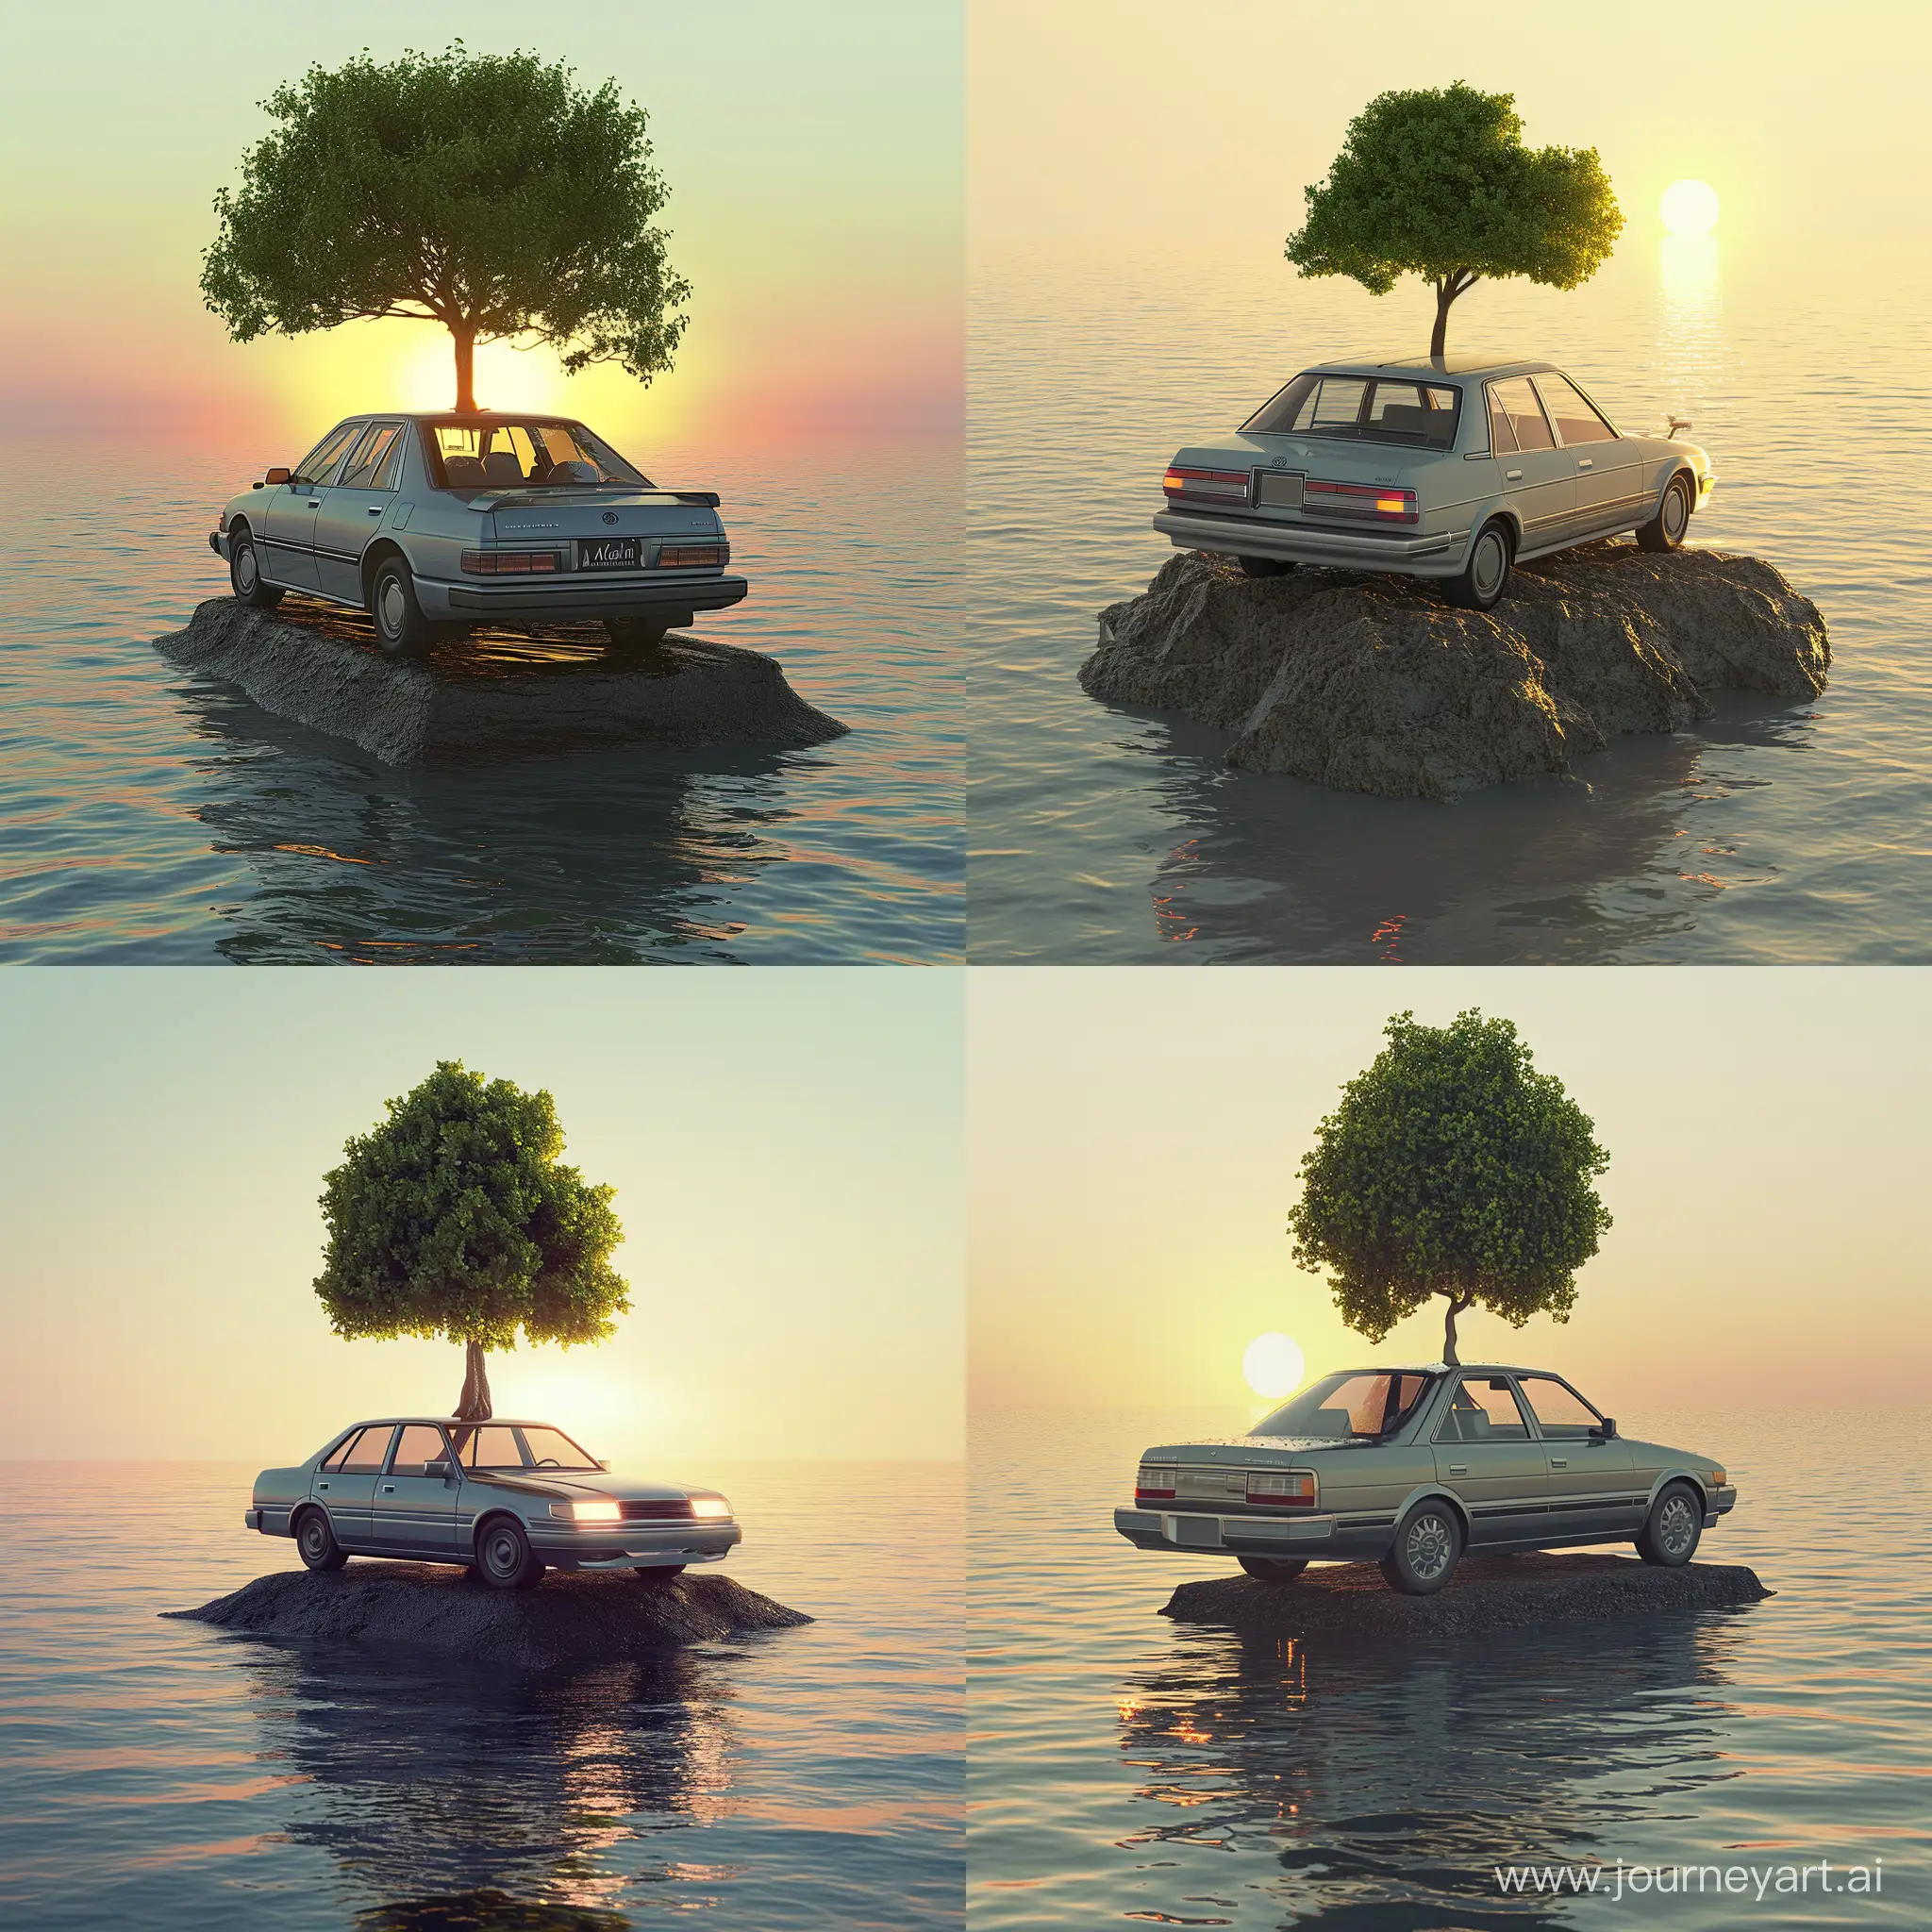 Alena Aenami picture style, car on top of a very Small Island in the middle of the Sea, Green Tree Back car, toyota Classic sedan, Light Car On, Details of the car gray, Sunset, Realistic Sunlight Reflections on the Sea, High Precision 